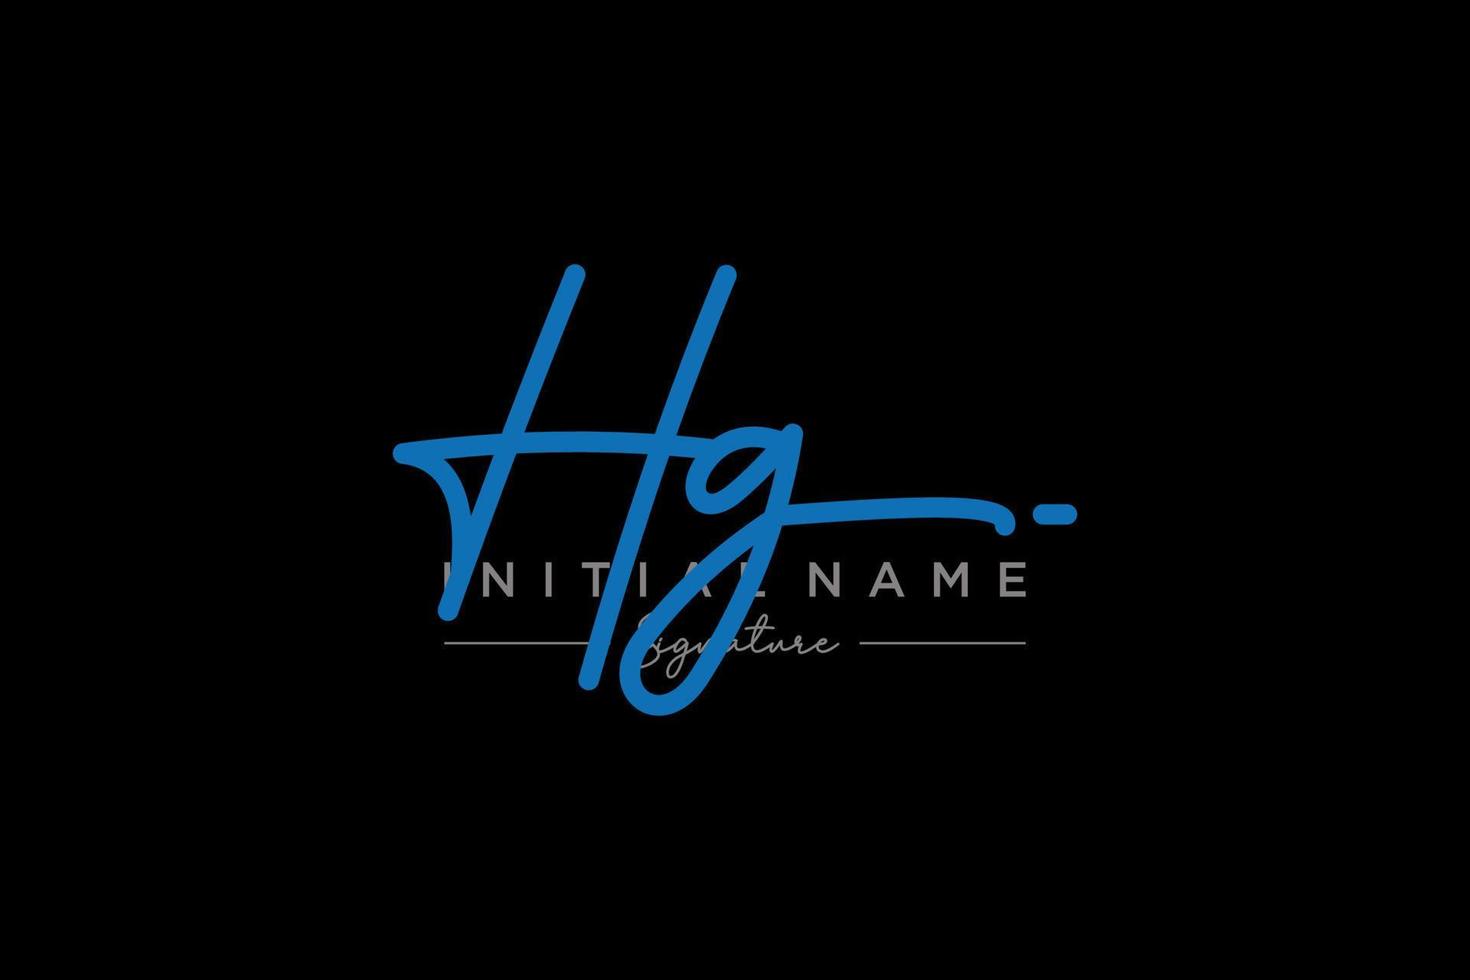 Initial HG signature logo template vector. Hand drawn Calligraphy lettering Vector illustration.